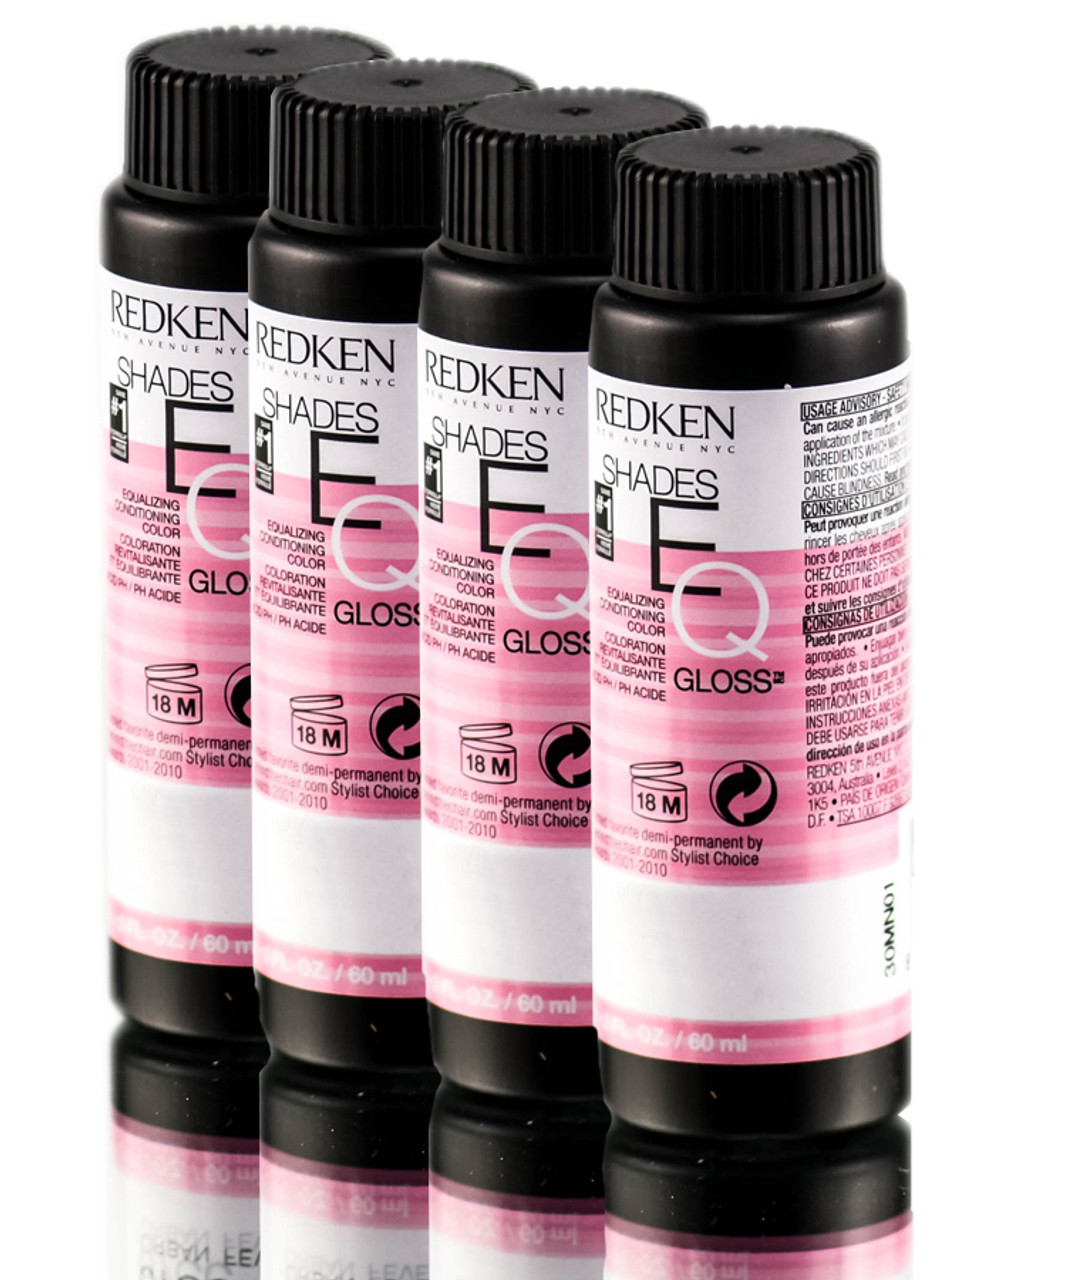 03V (3V) - Orchid Redken Shades EQ Demi-Permanent Equalizing Conditioning  Color Gloss, Ammonia-Free